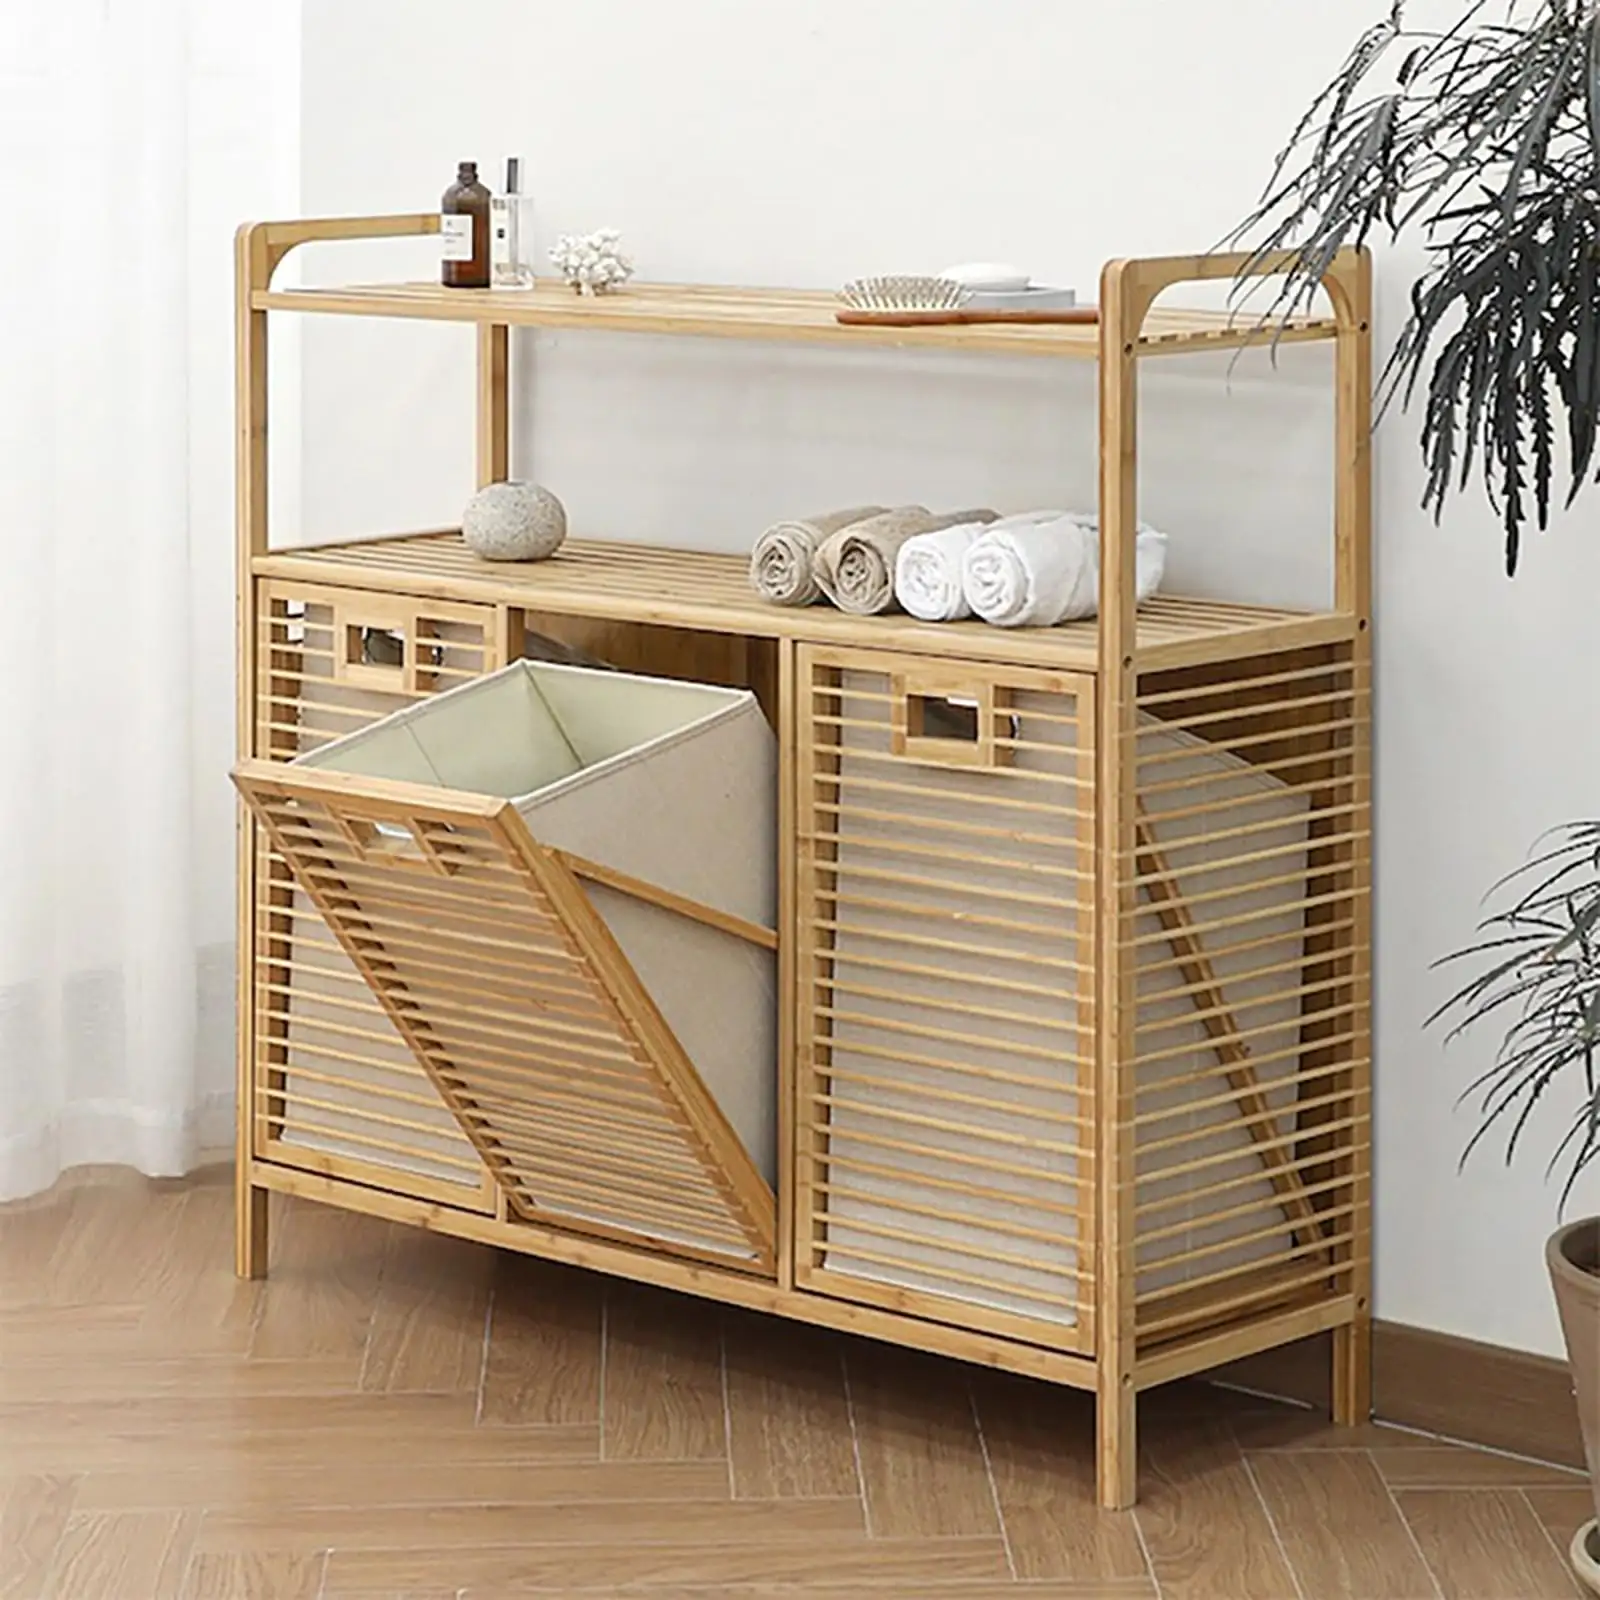 Custom Bamboo Laundry Basket Bamboo Tilt Out Laundry Cabinet Hamper with Shelf and Liner Bags Dirty Clothes Basket for Bathroom